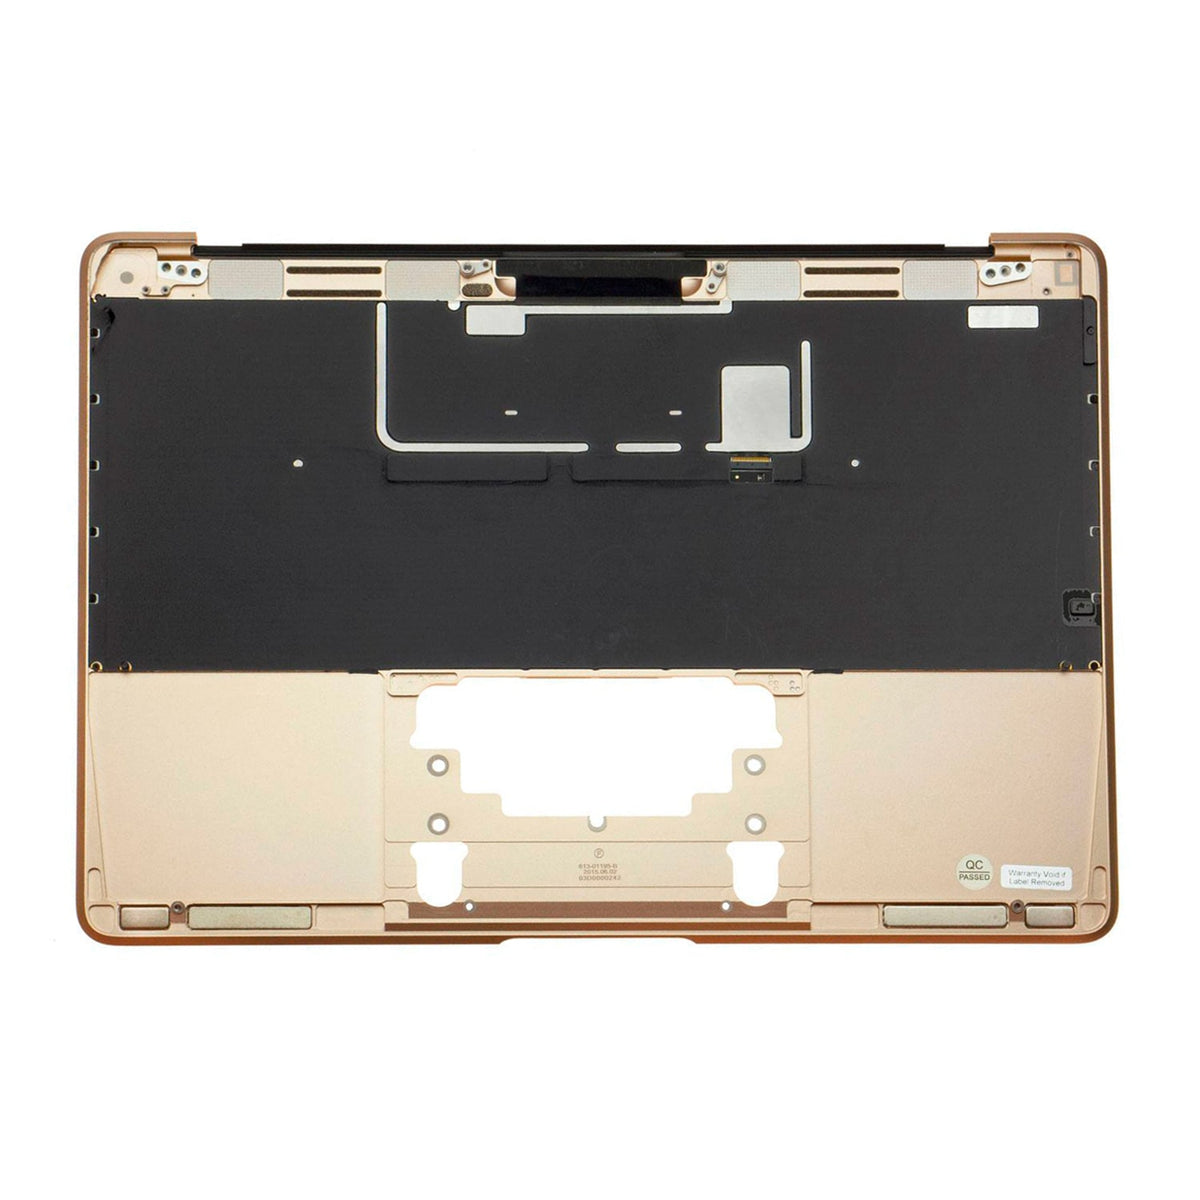 GOLD UPPER CASE WITH KEYBOARD FOR MACBOOK RETINA 12" A1534 (EARLY 2016 - MID 2017)